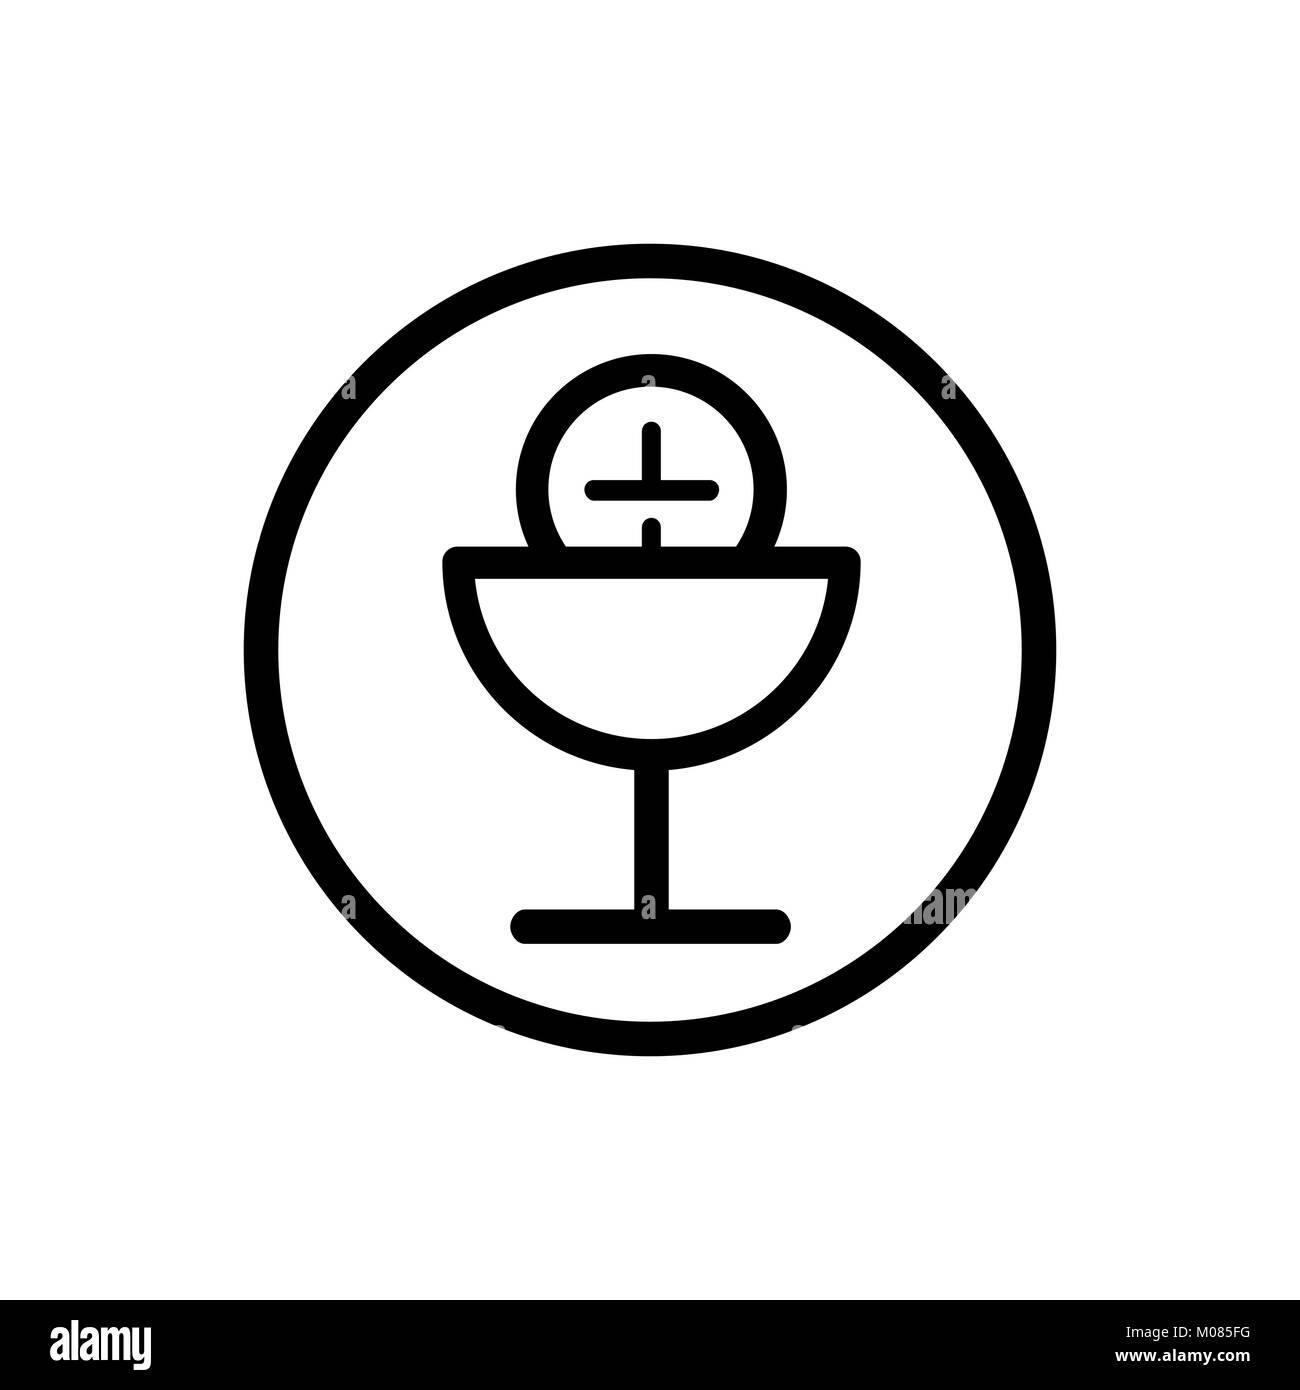 Communion line icon on a white background. Vector illustration Stock Vector